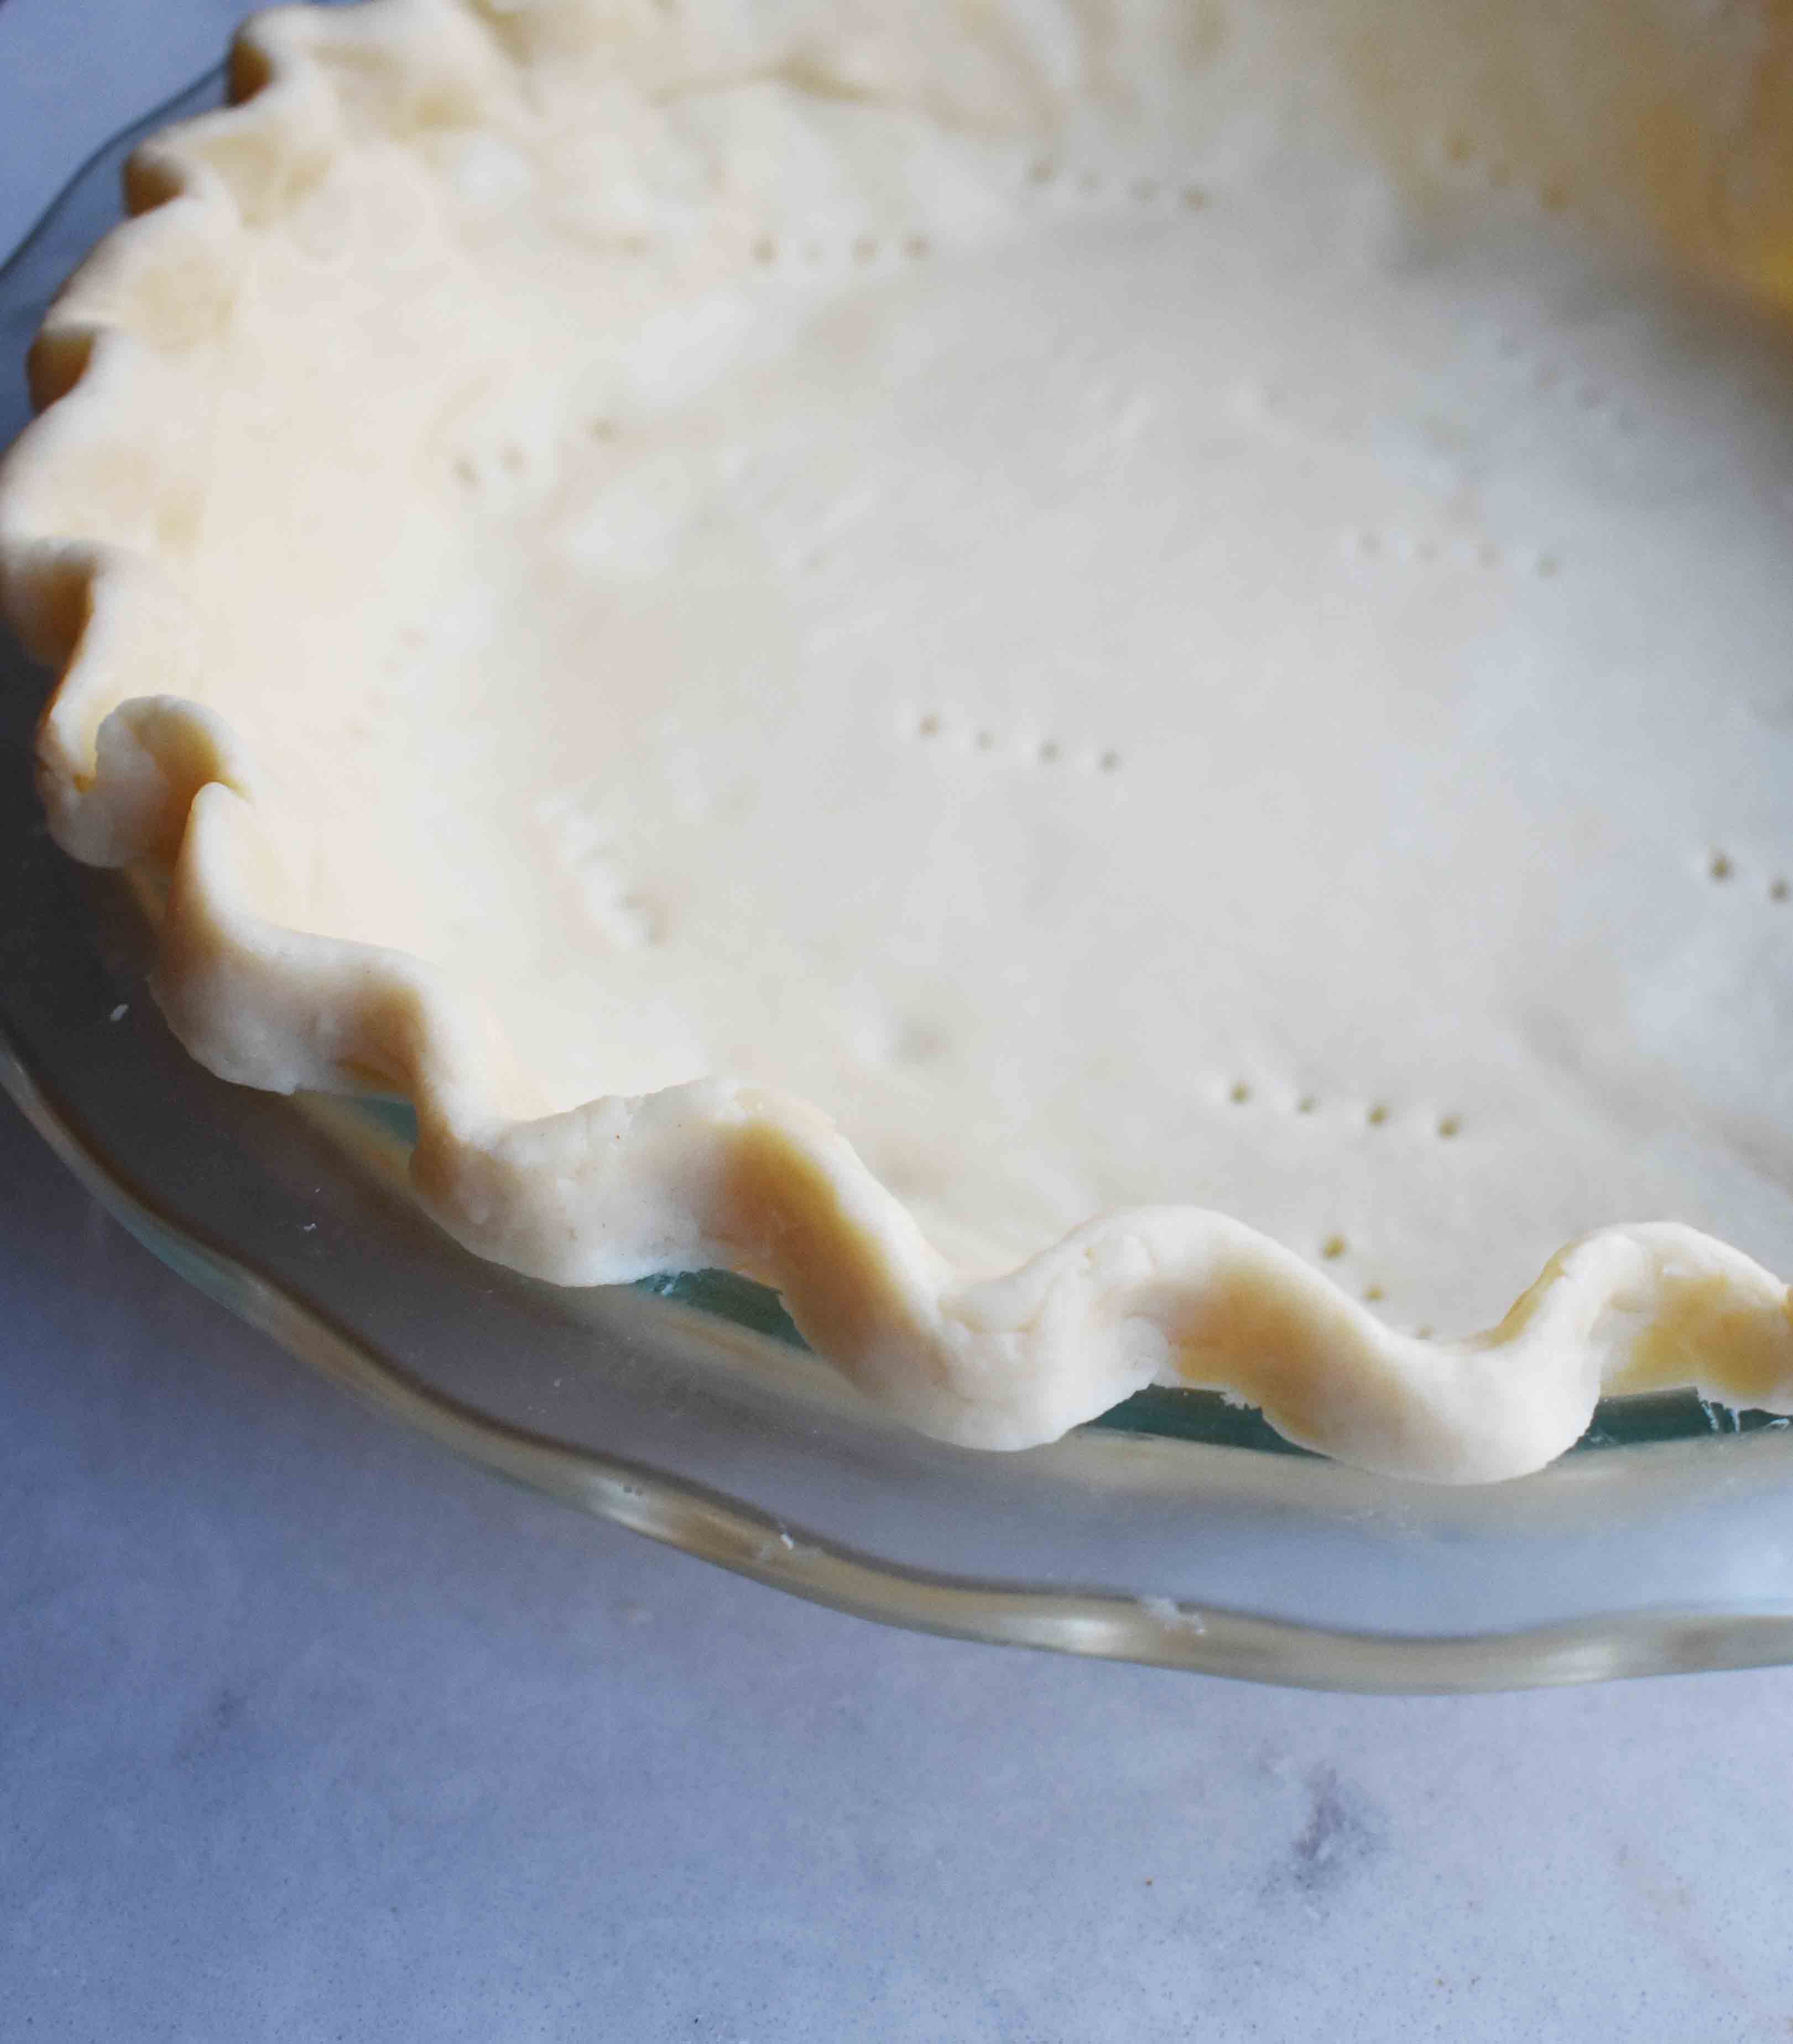 All Butter Flaky Pie Crust. Tips and tricks to make foolproof perfect pie crust every single time. www.modernhoney.com